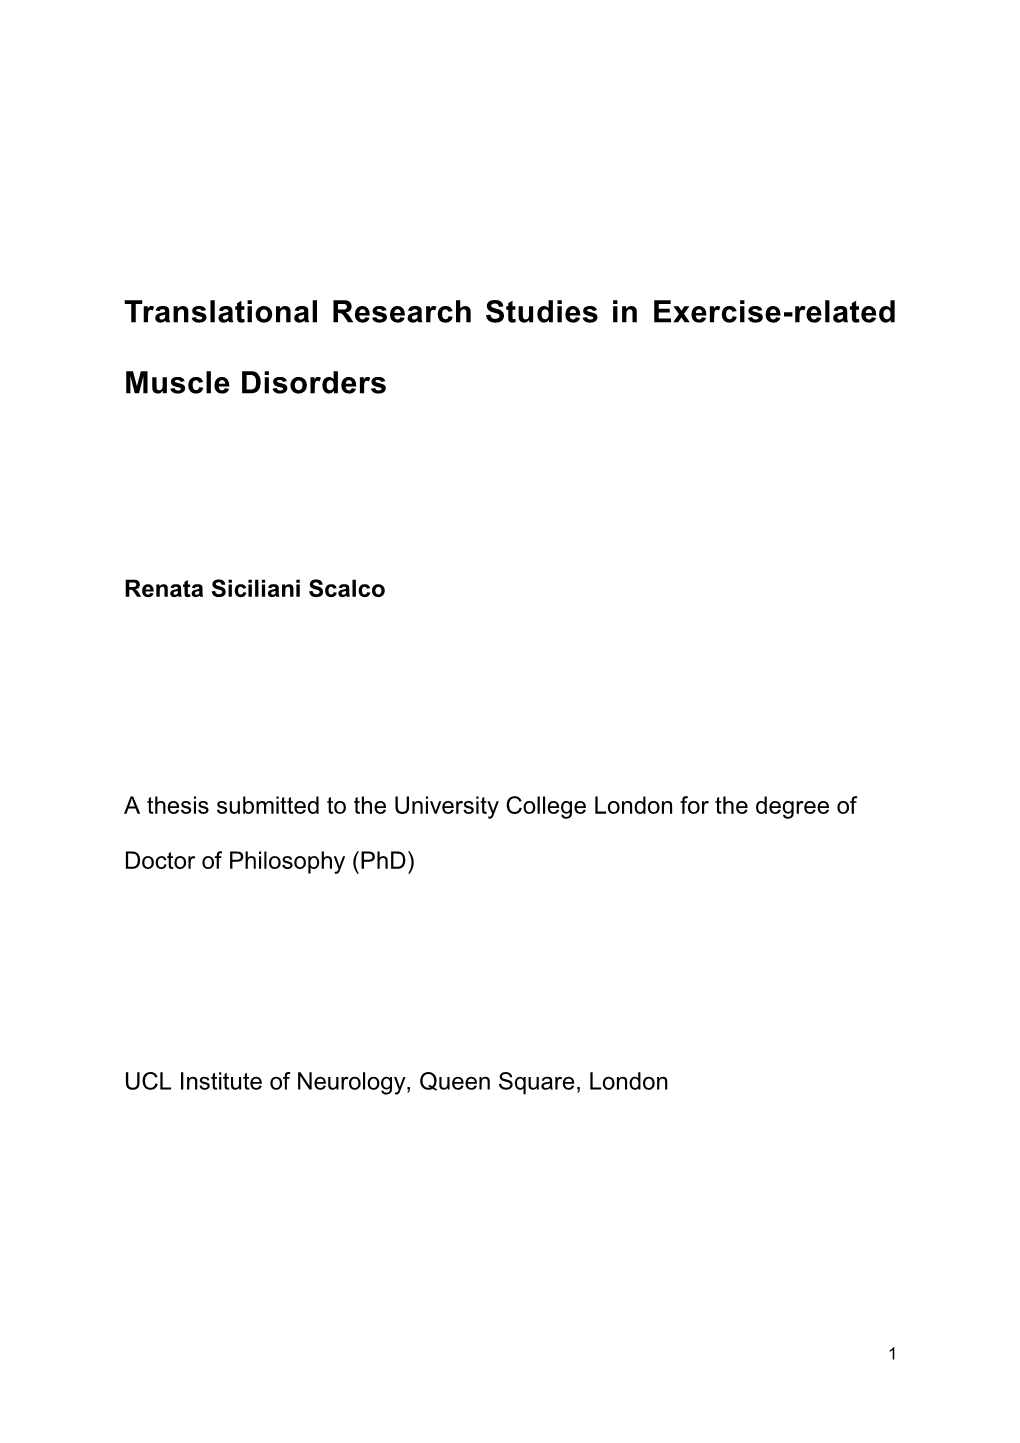 Translational Research Studies in Exercise-Related Muscle Disorders